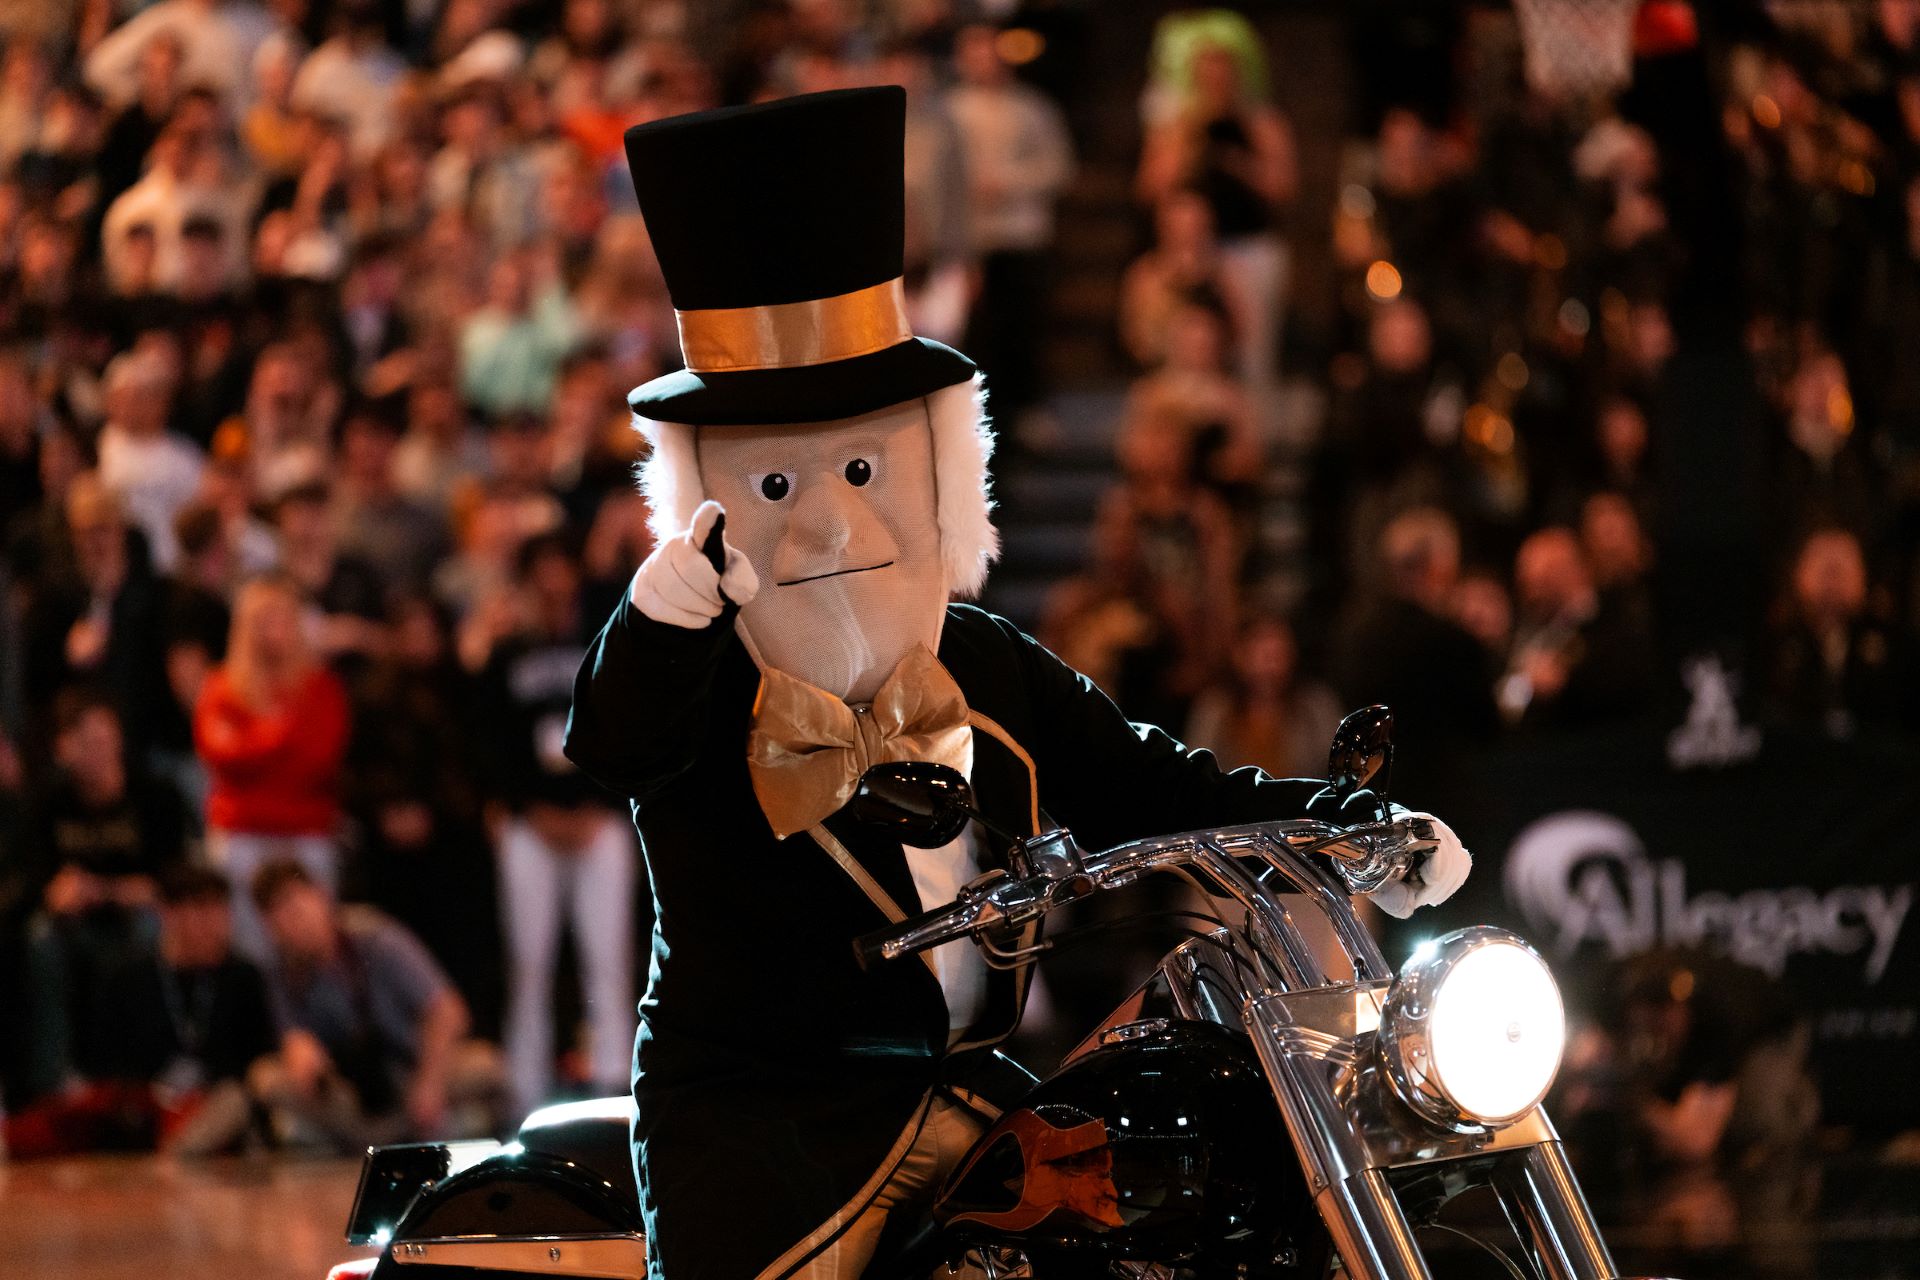 Demon Deacon and his motorcycle at a basketball game